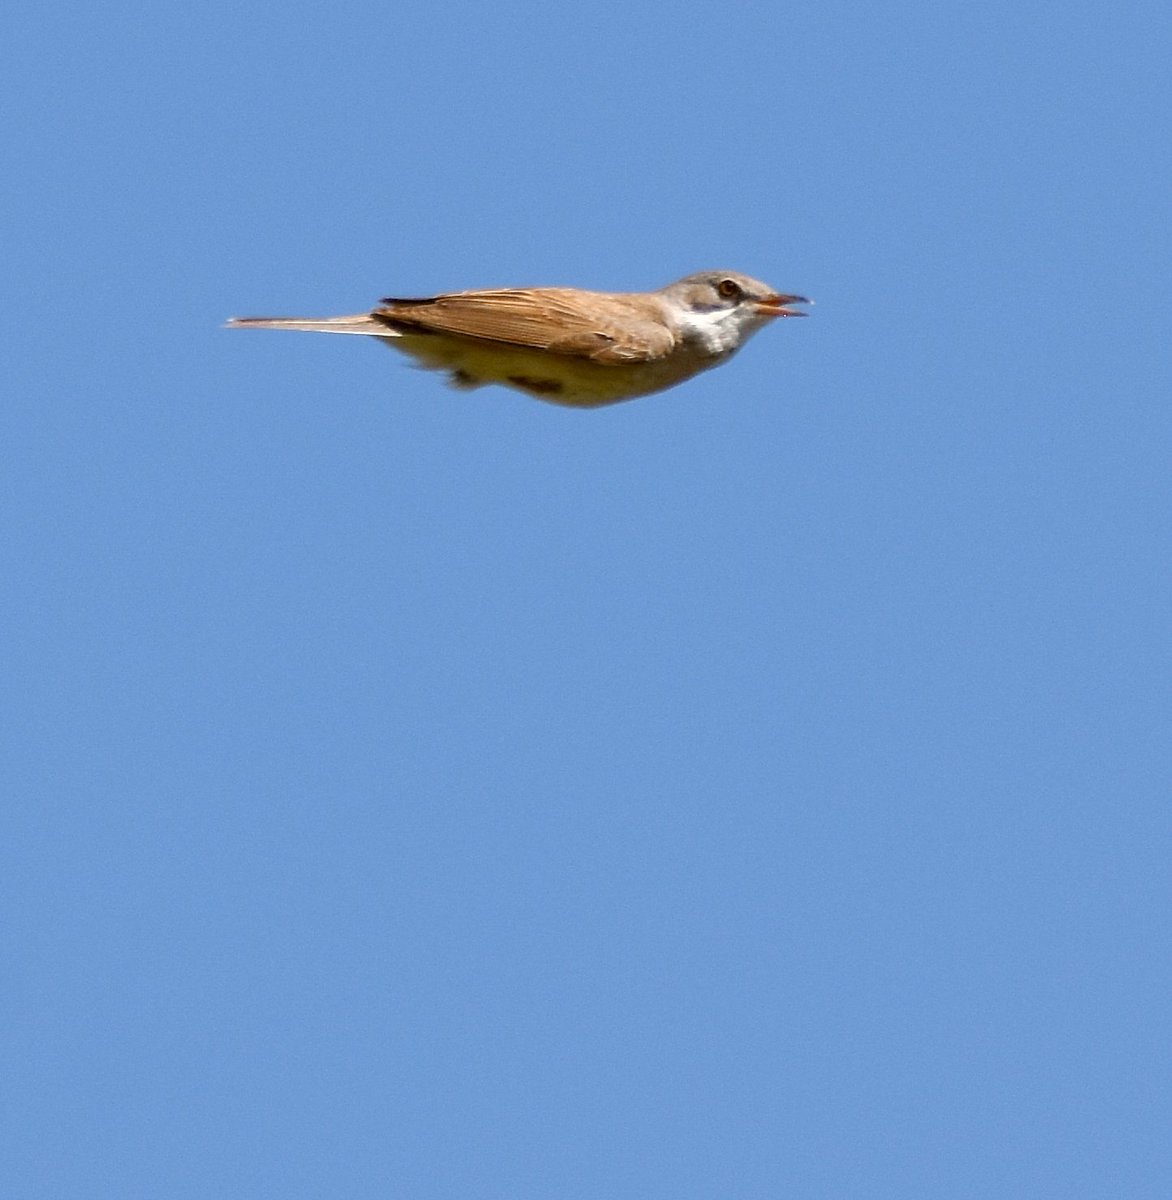 What a surprise.... a new bird thrown my way! I think this Whitethroat said 'hi' as he thankfully sailed harmlessly by...